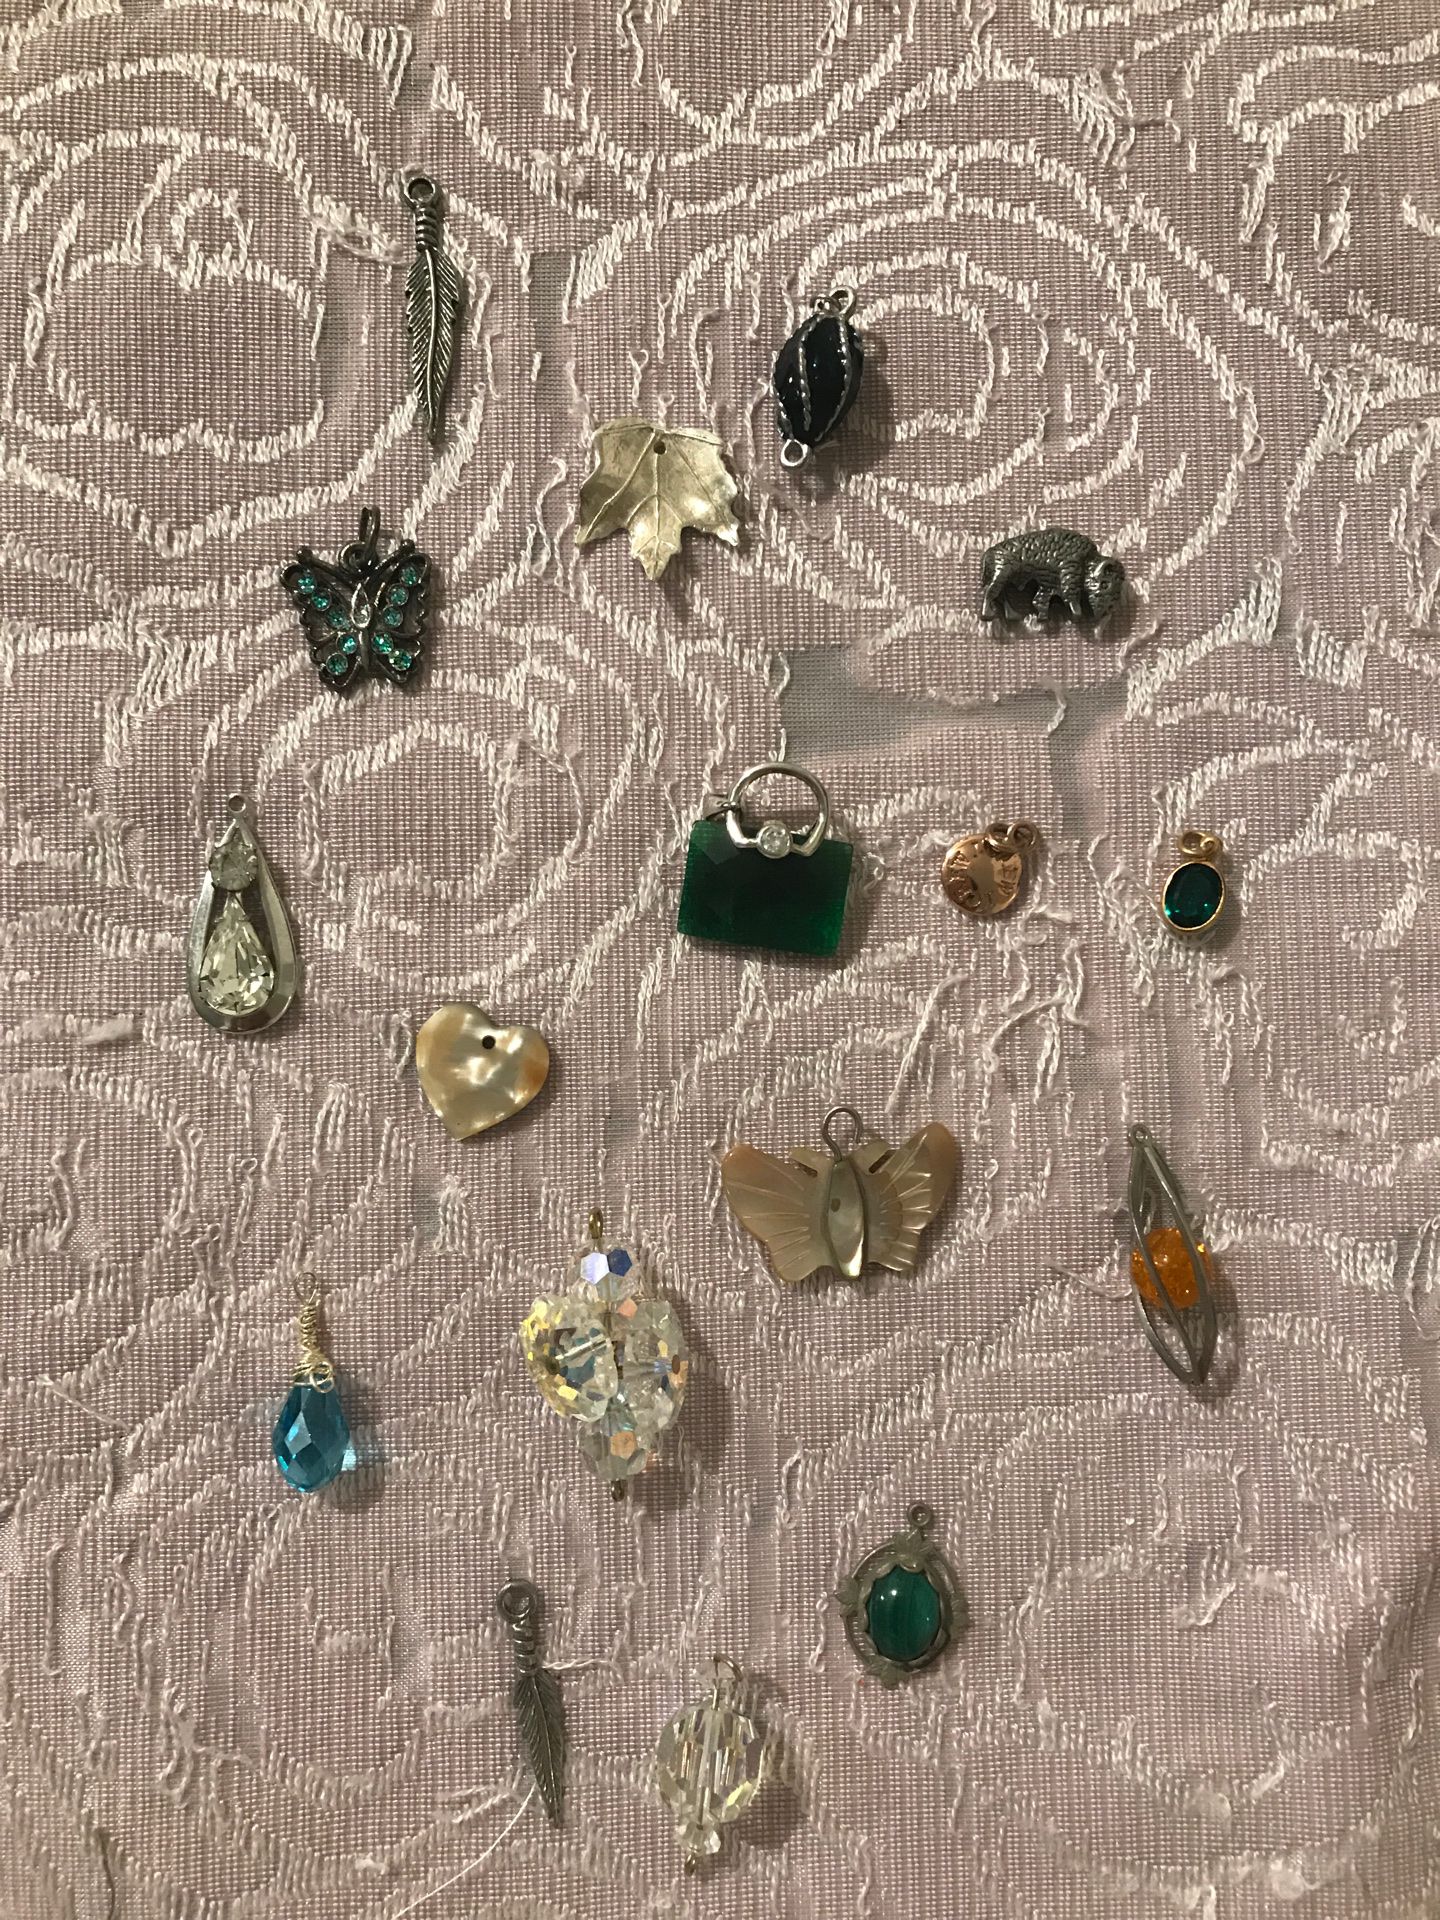 Assorted tiny charms $20 for all 17